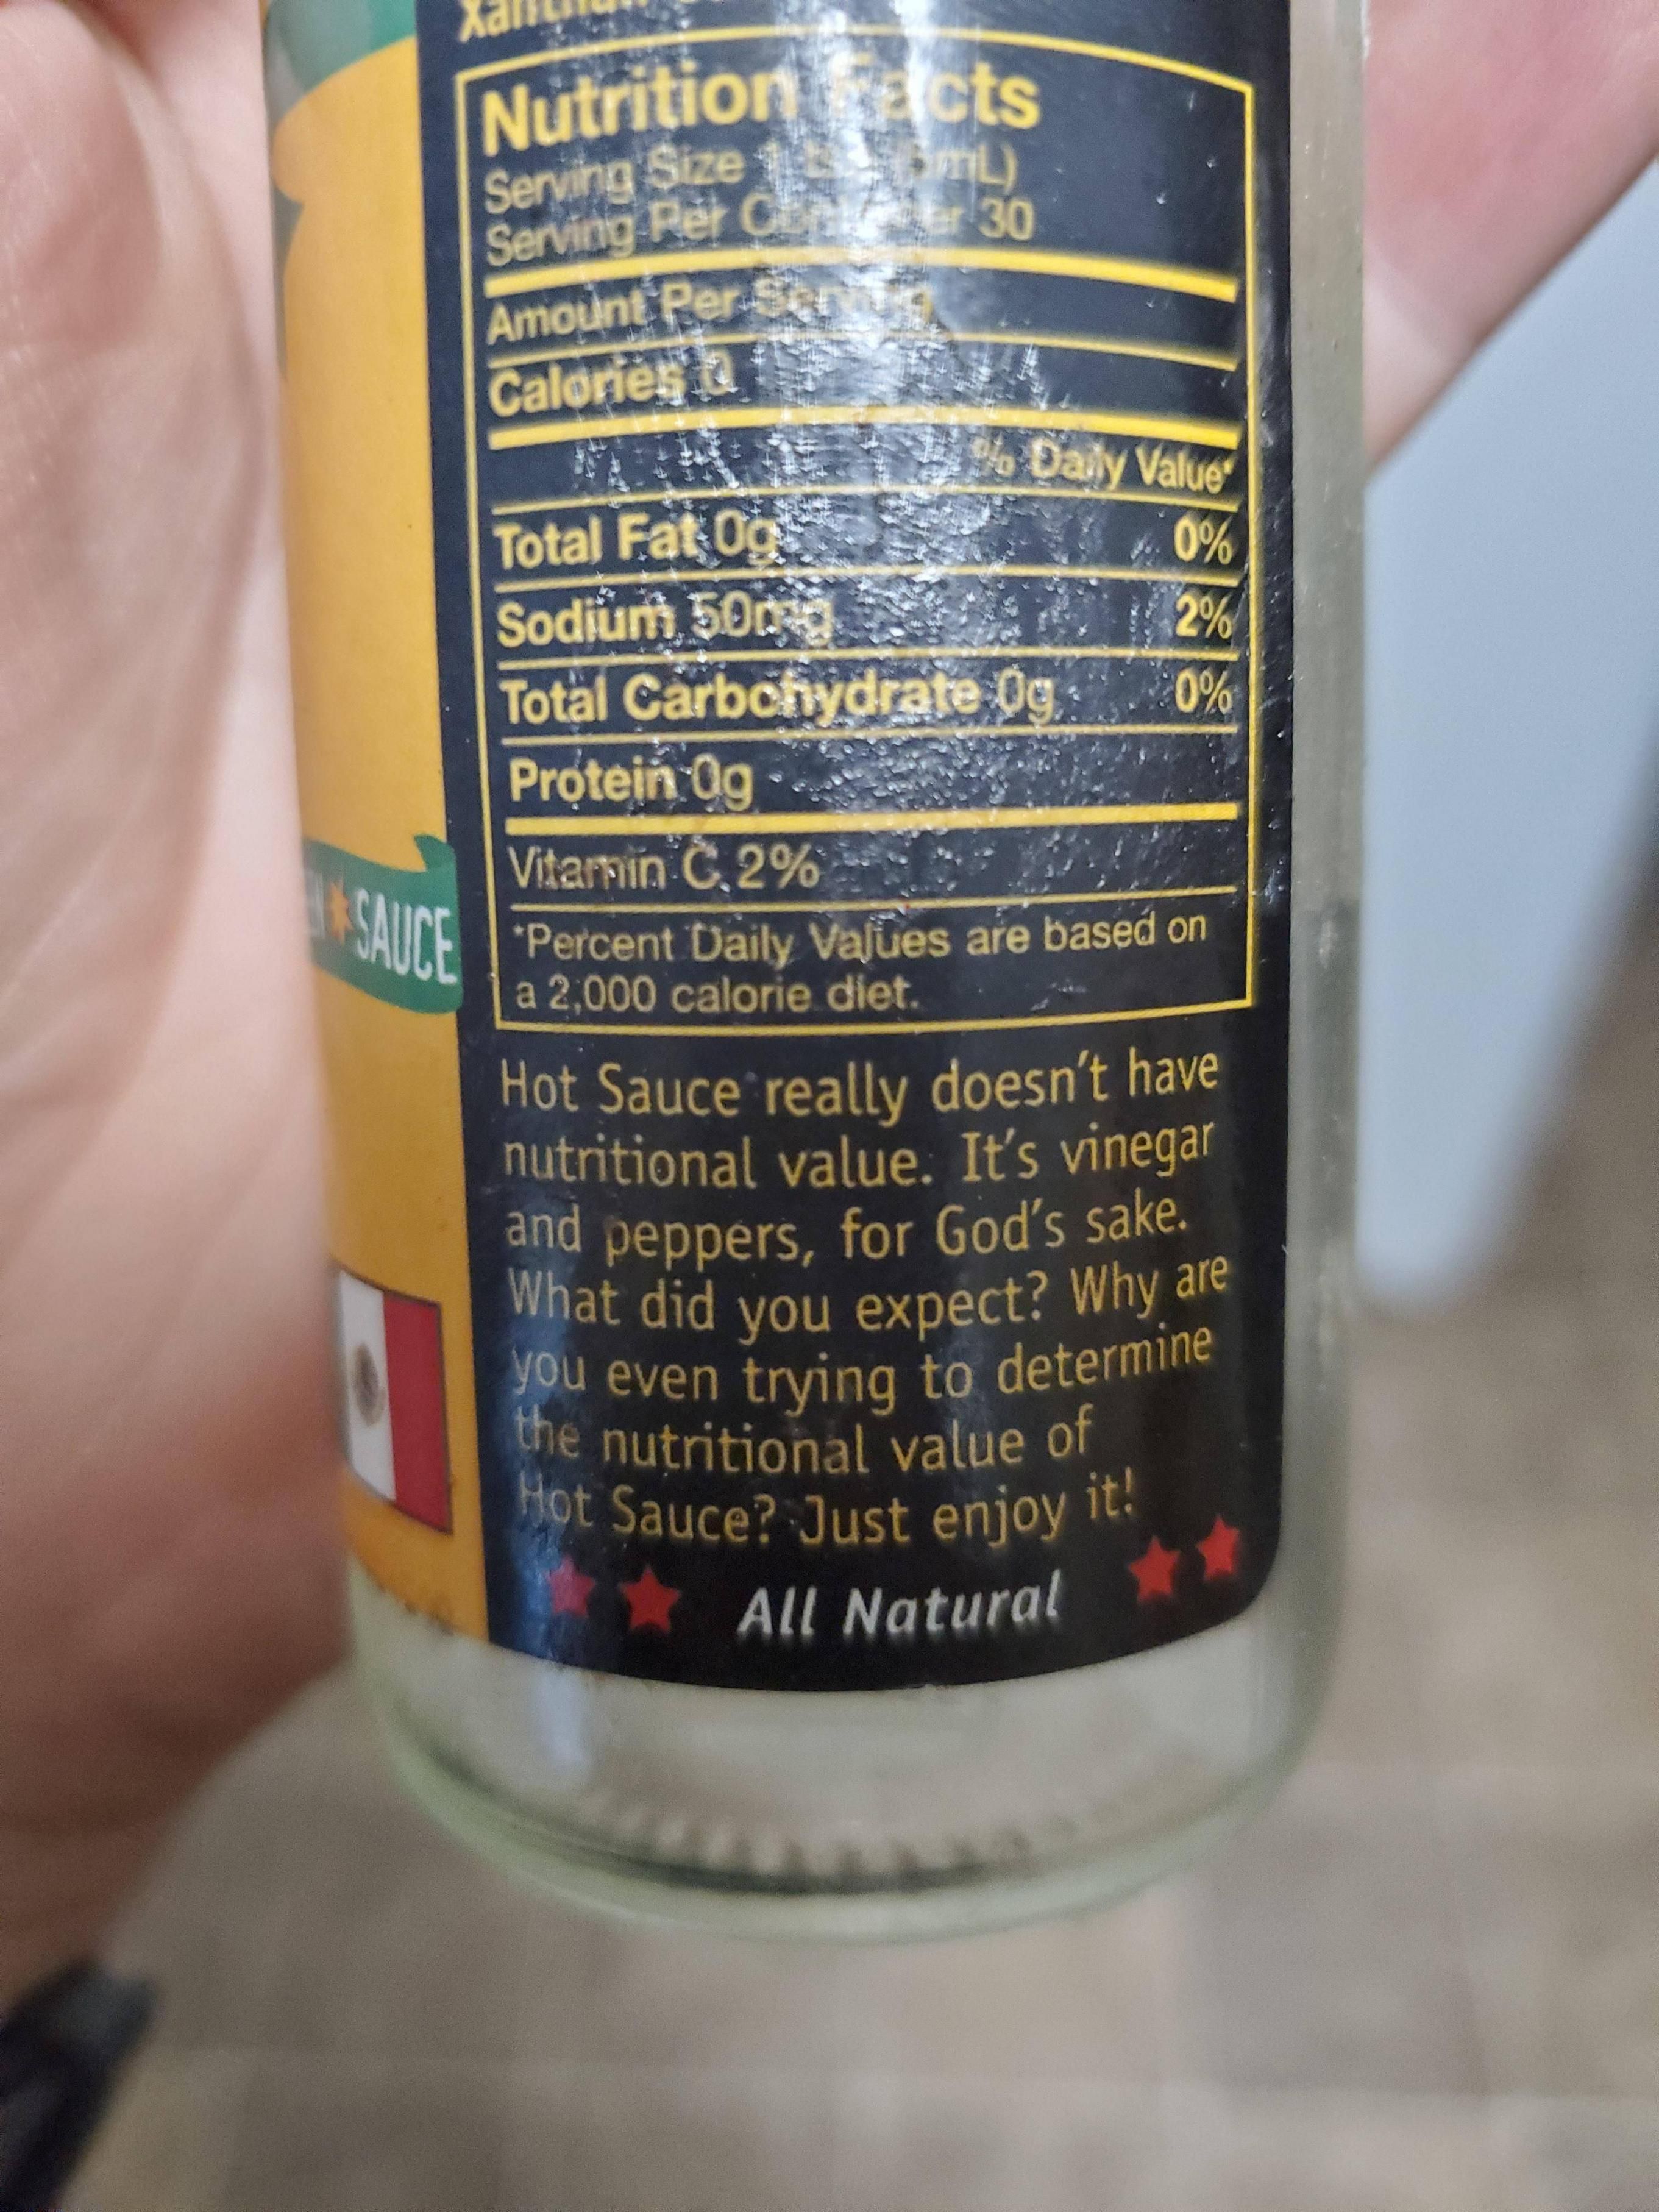 I found a funny comment on this bottle of hot sauce